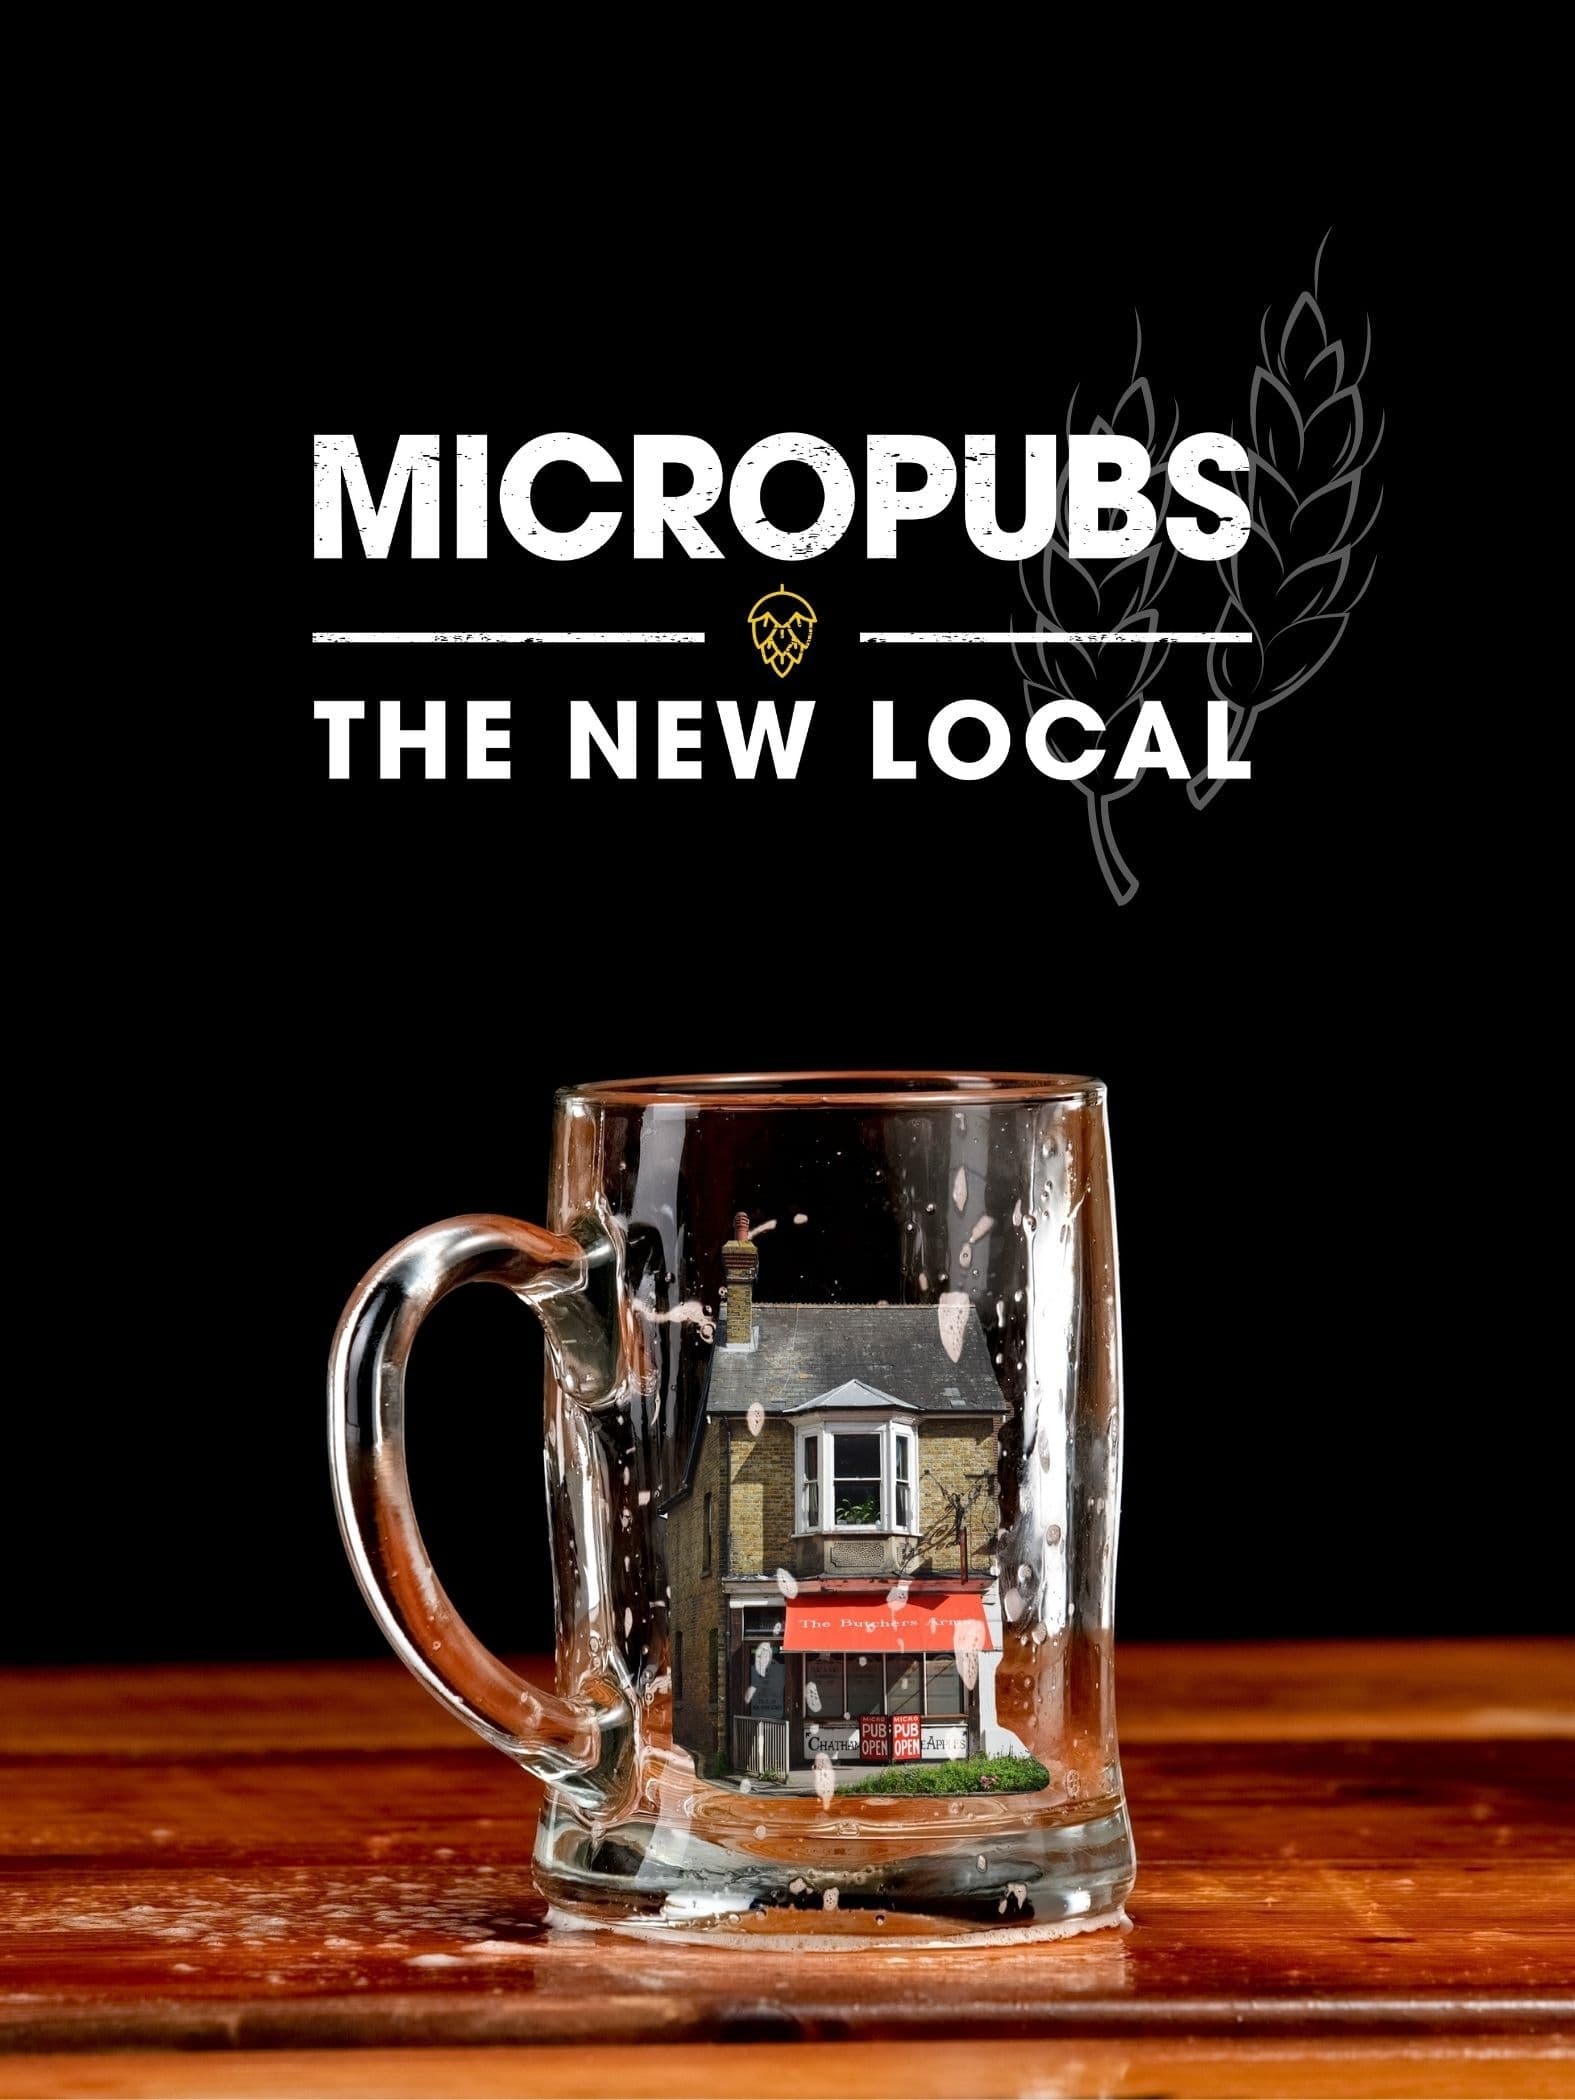 Micropubs - The New Local